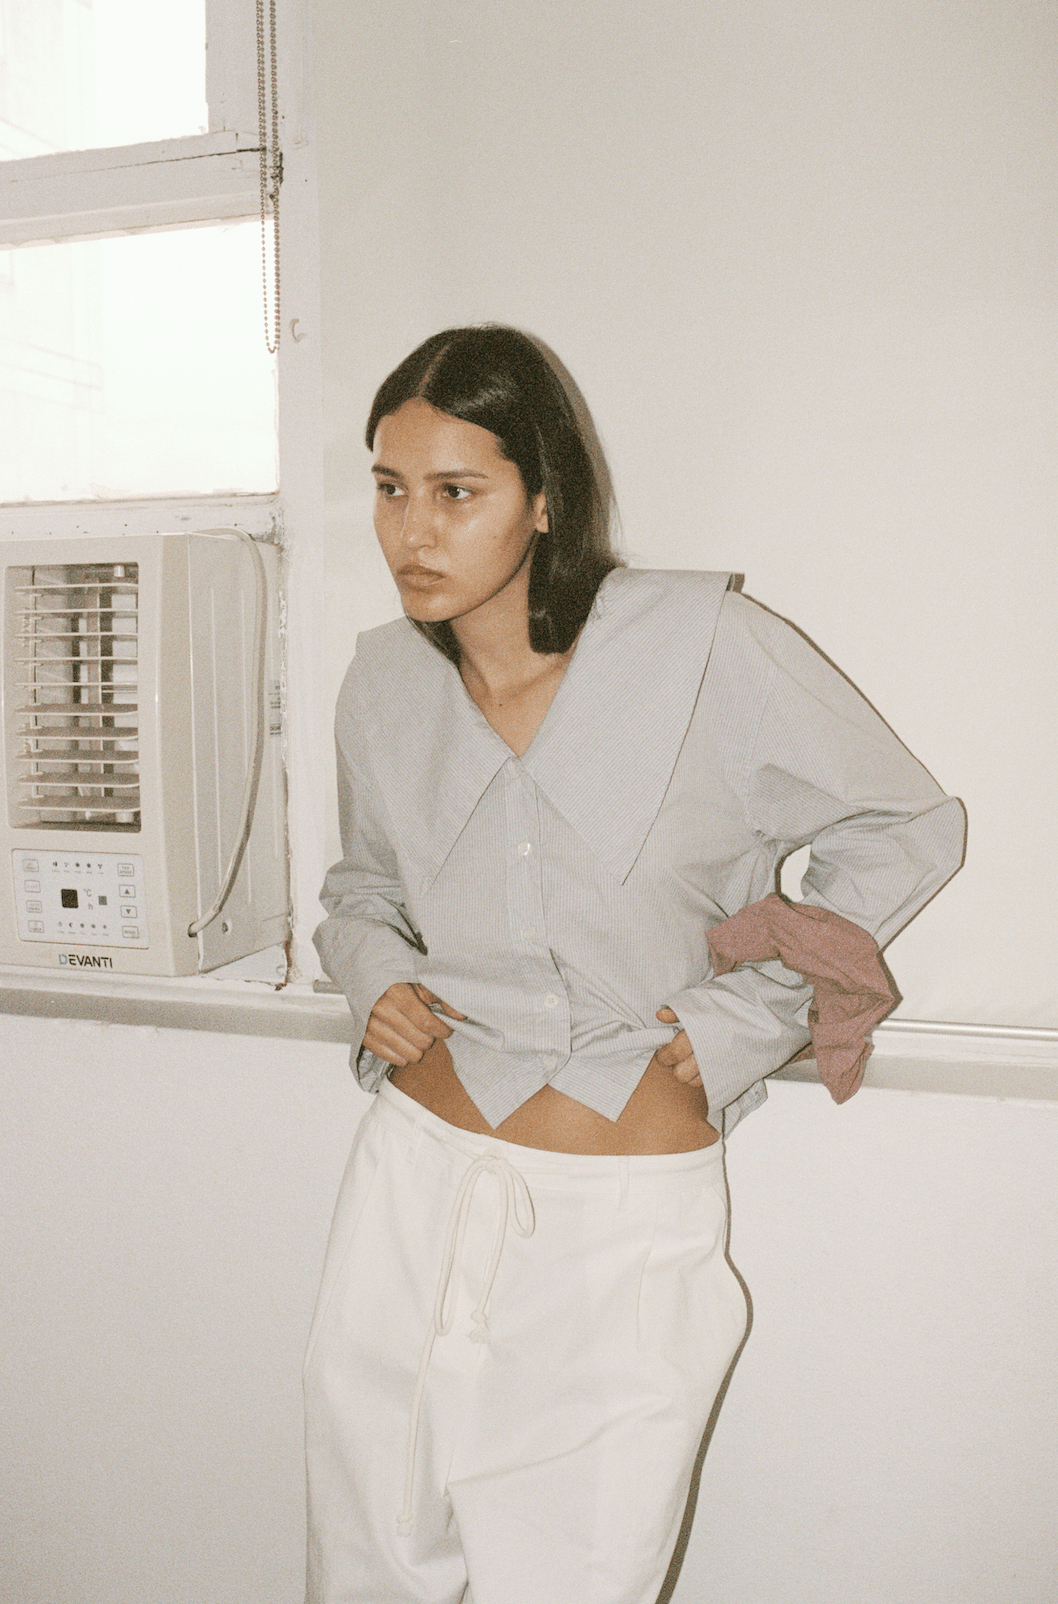 Film photo of model wearing the Oversized Collared Shirt in Dream Stripe, pulling shirt hem up to show drawcord waist detailing on Bartack Pants.